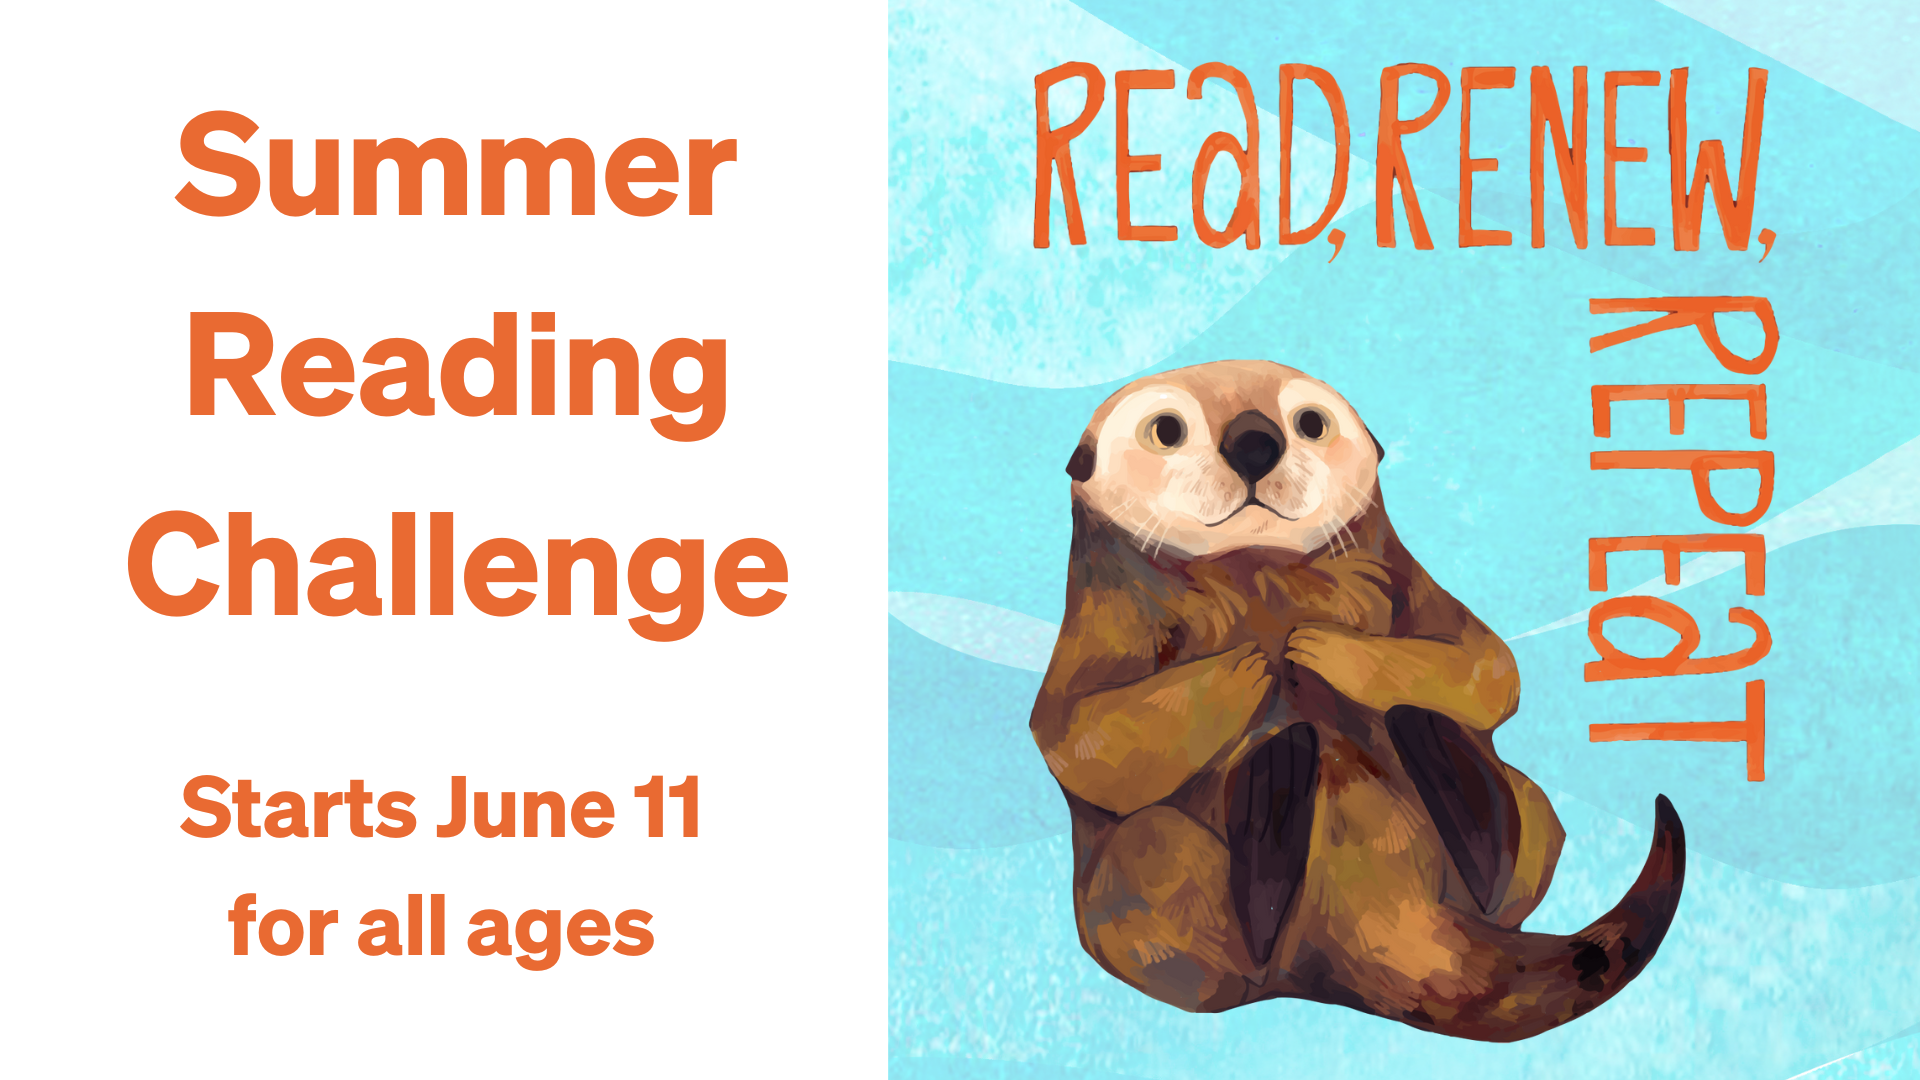 Summer Reading Challenge - Starts June 11 for all ages - Read, Renew, Repeat